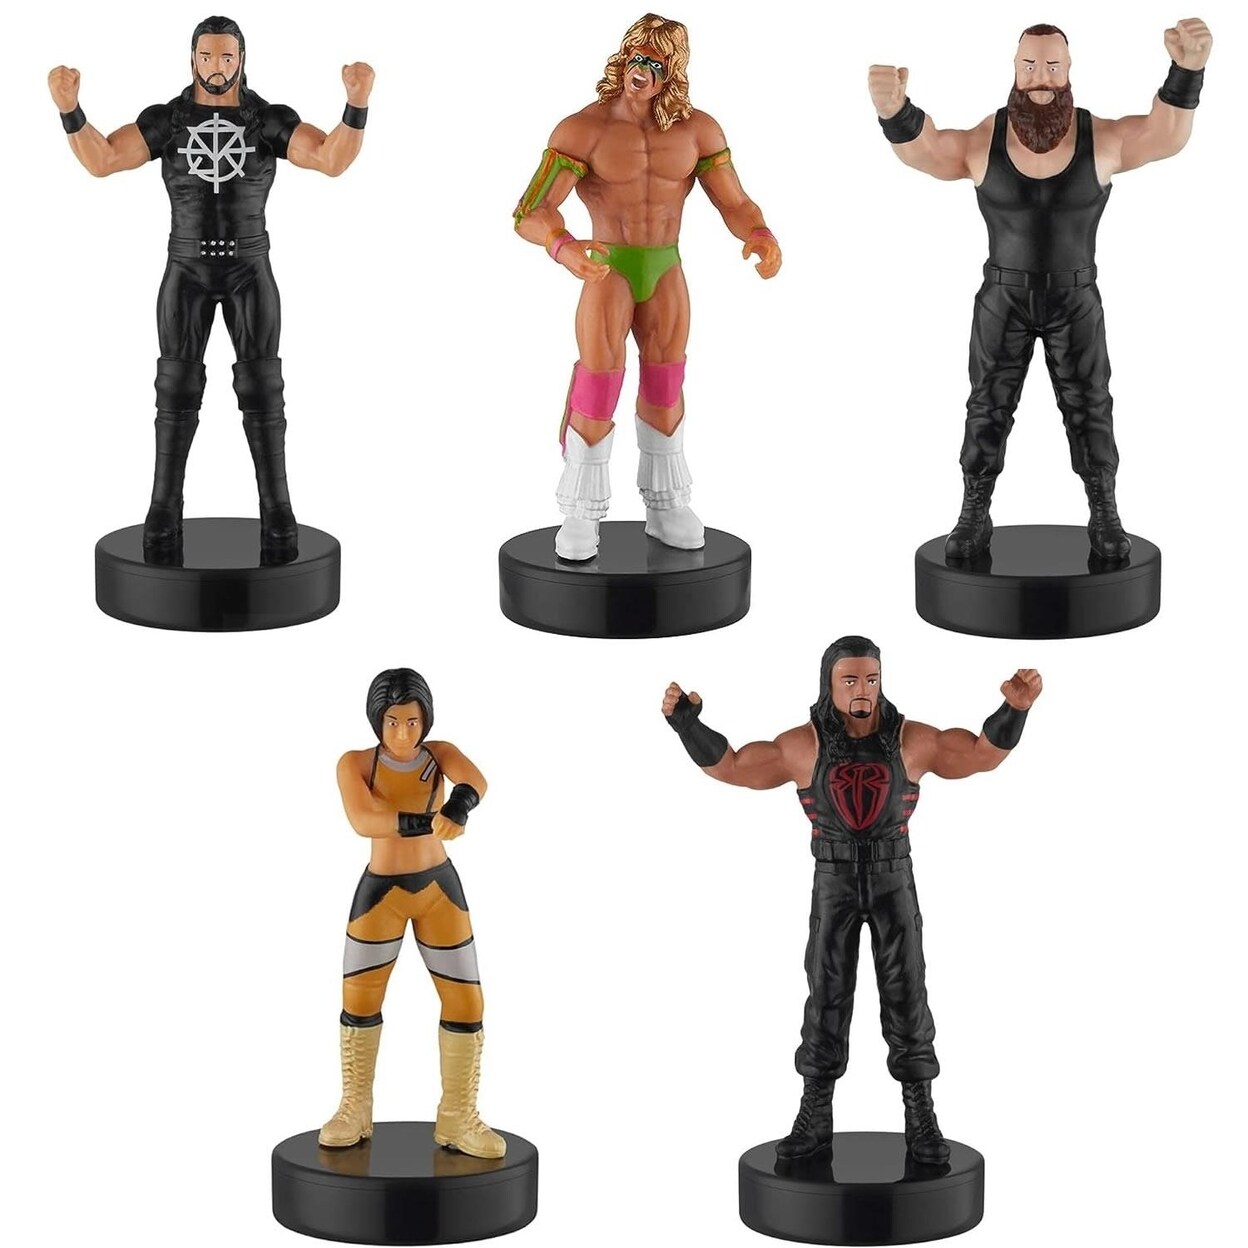 PMI International WWE Wrestler Superstar Stampers 5pk Party Cake Toppers Character Figures Set